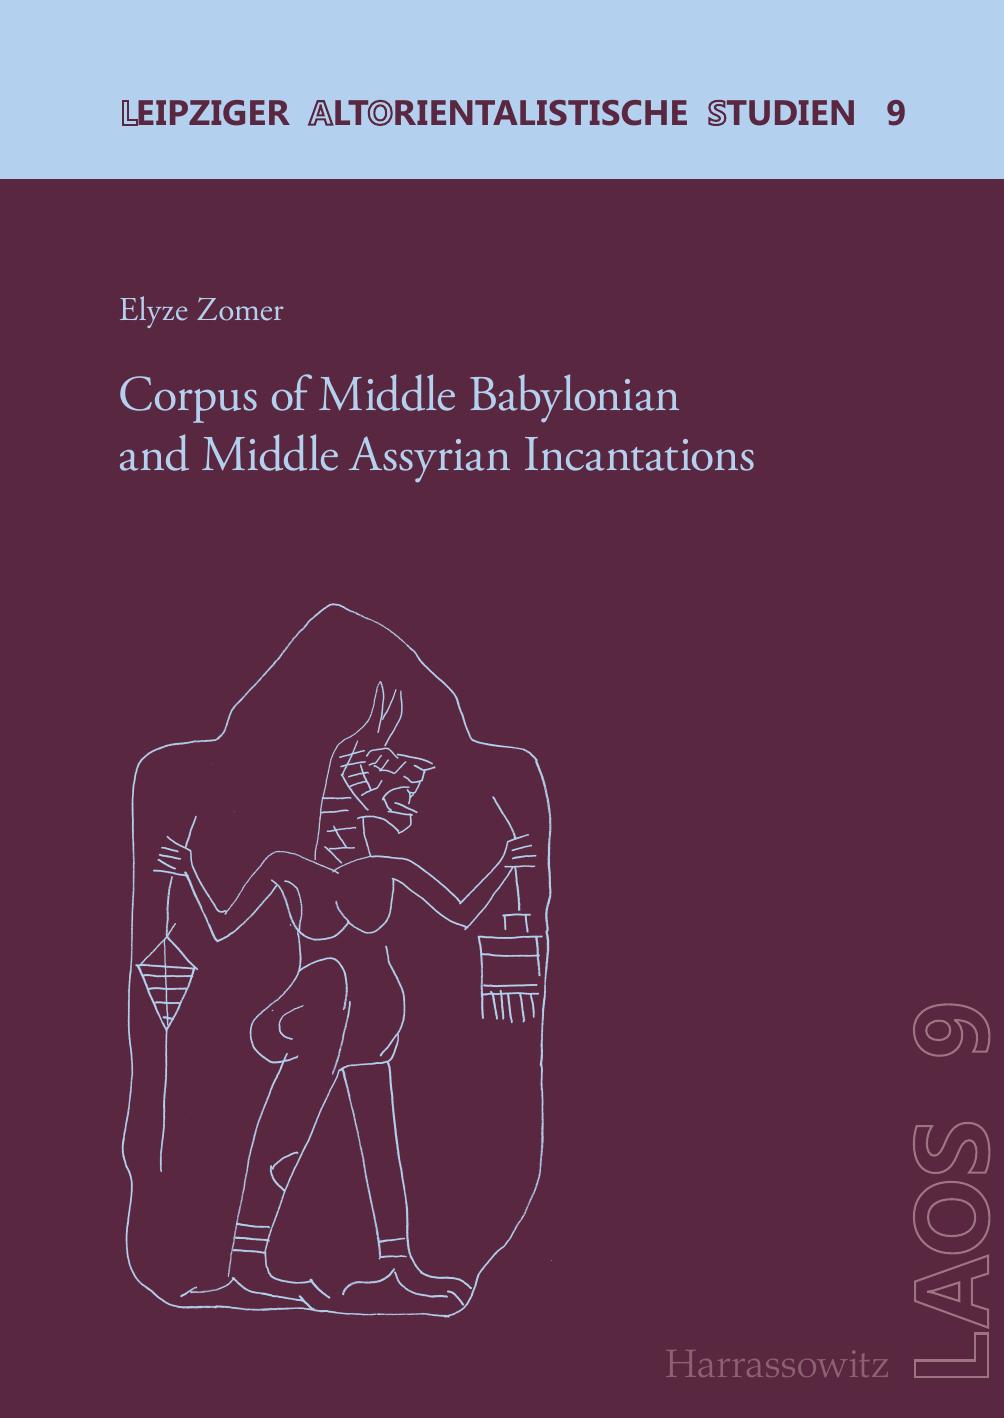 Corpus of Middle Babylonian and Middle Assyrian Incantations by Elyze Zomer